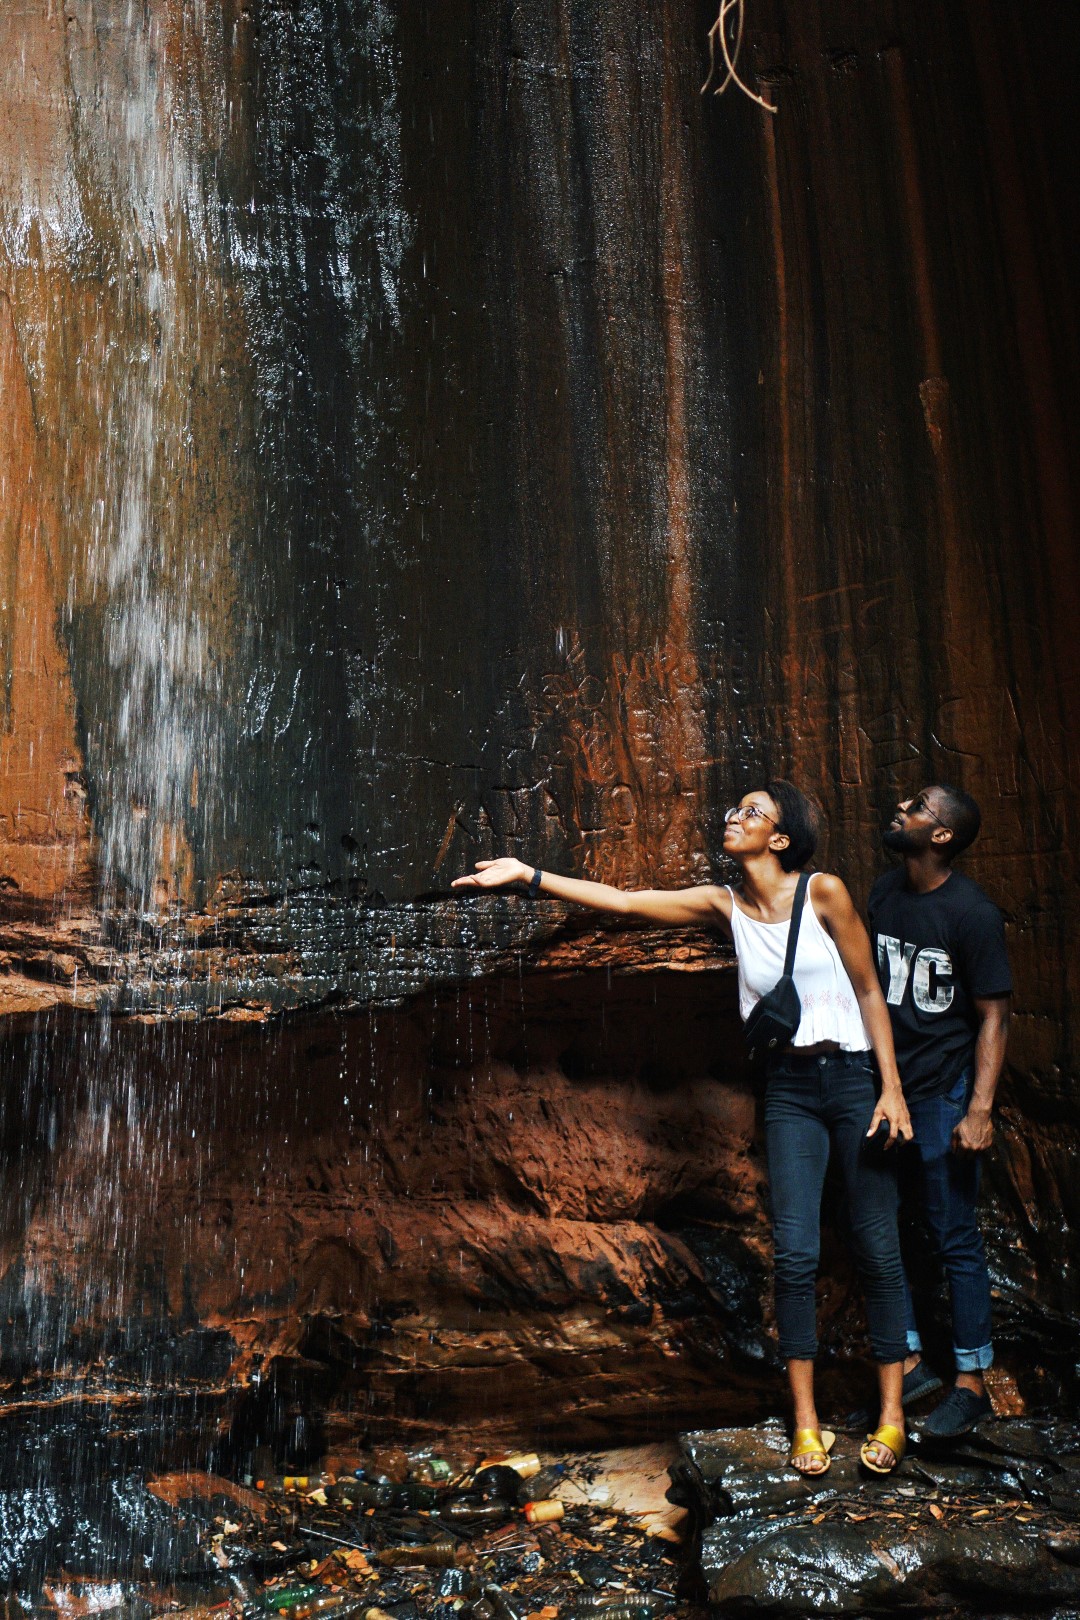 Cassie Daves at the Ngwo waterfall in Enugu